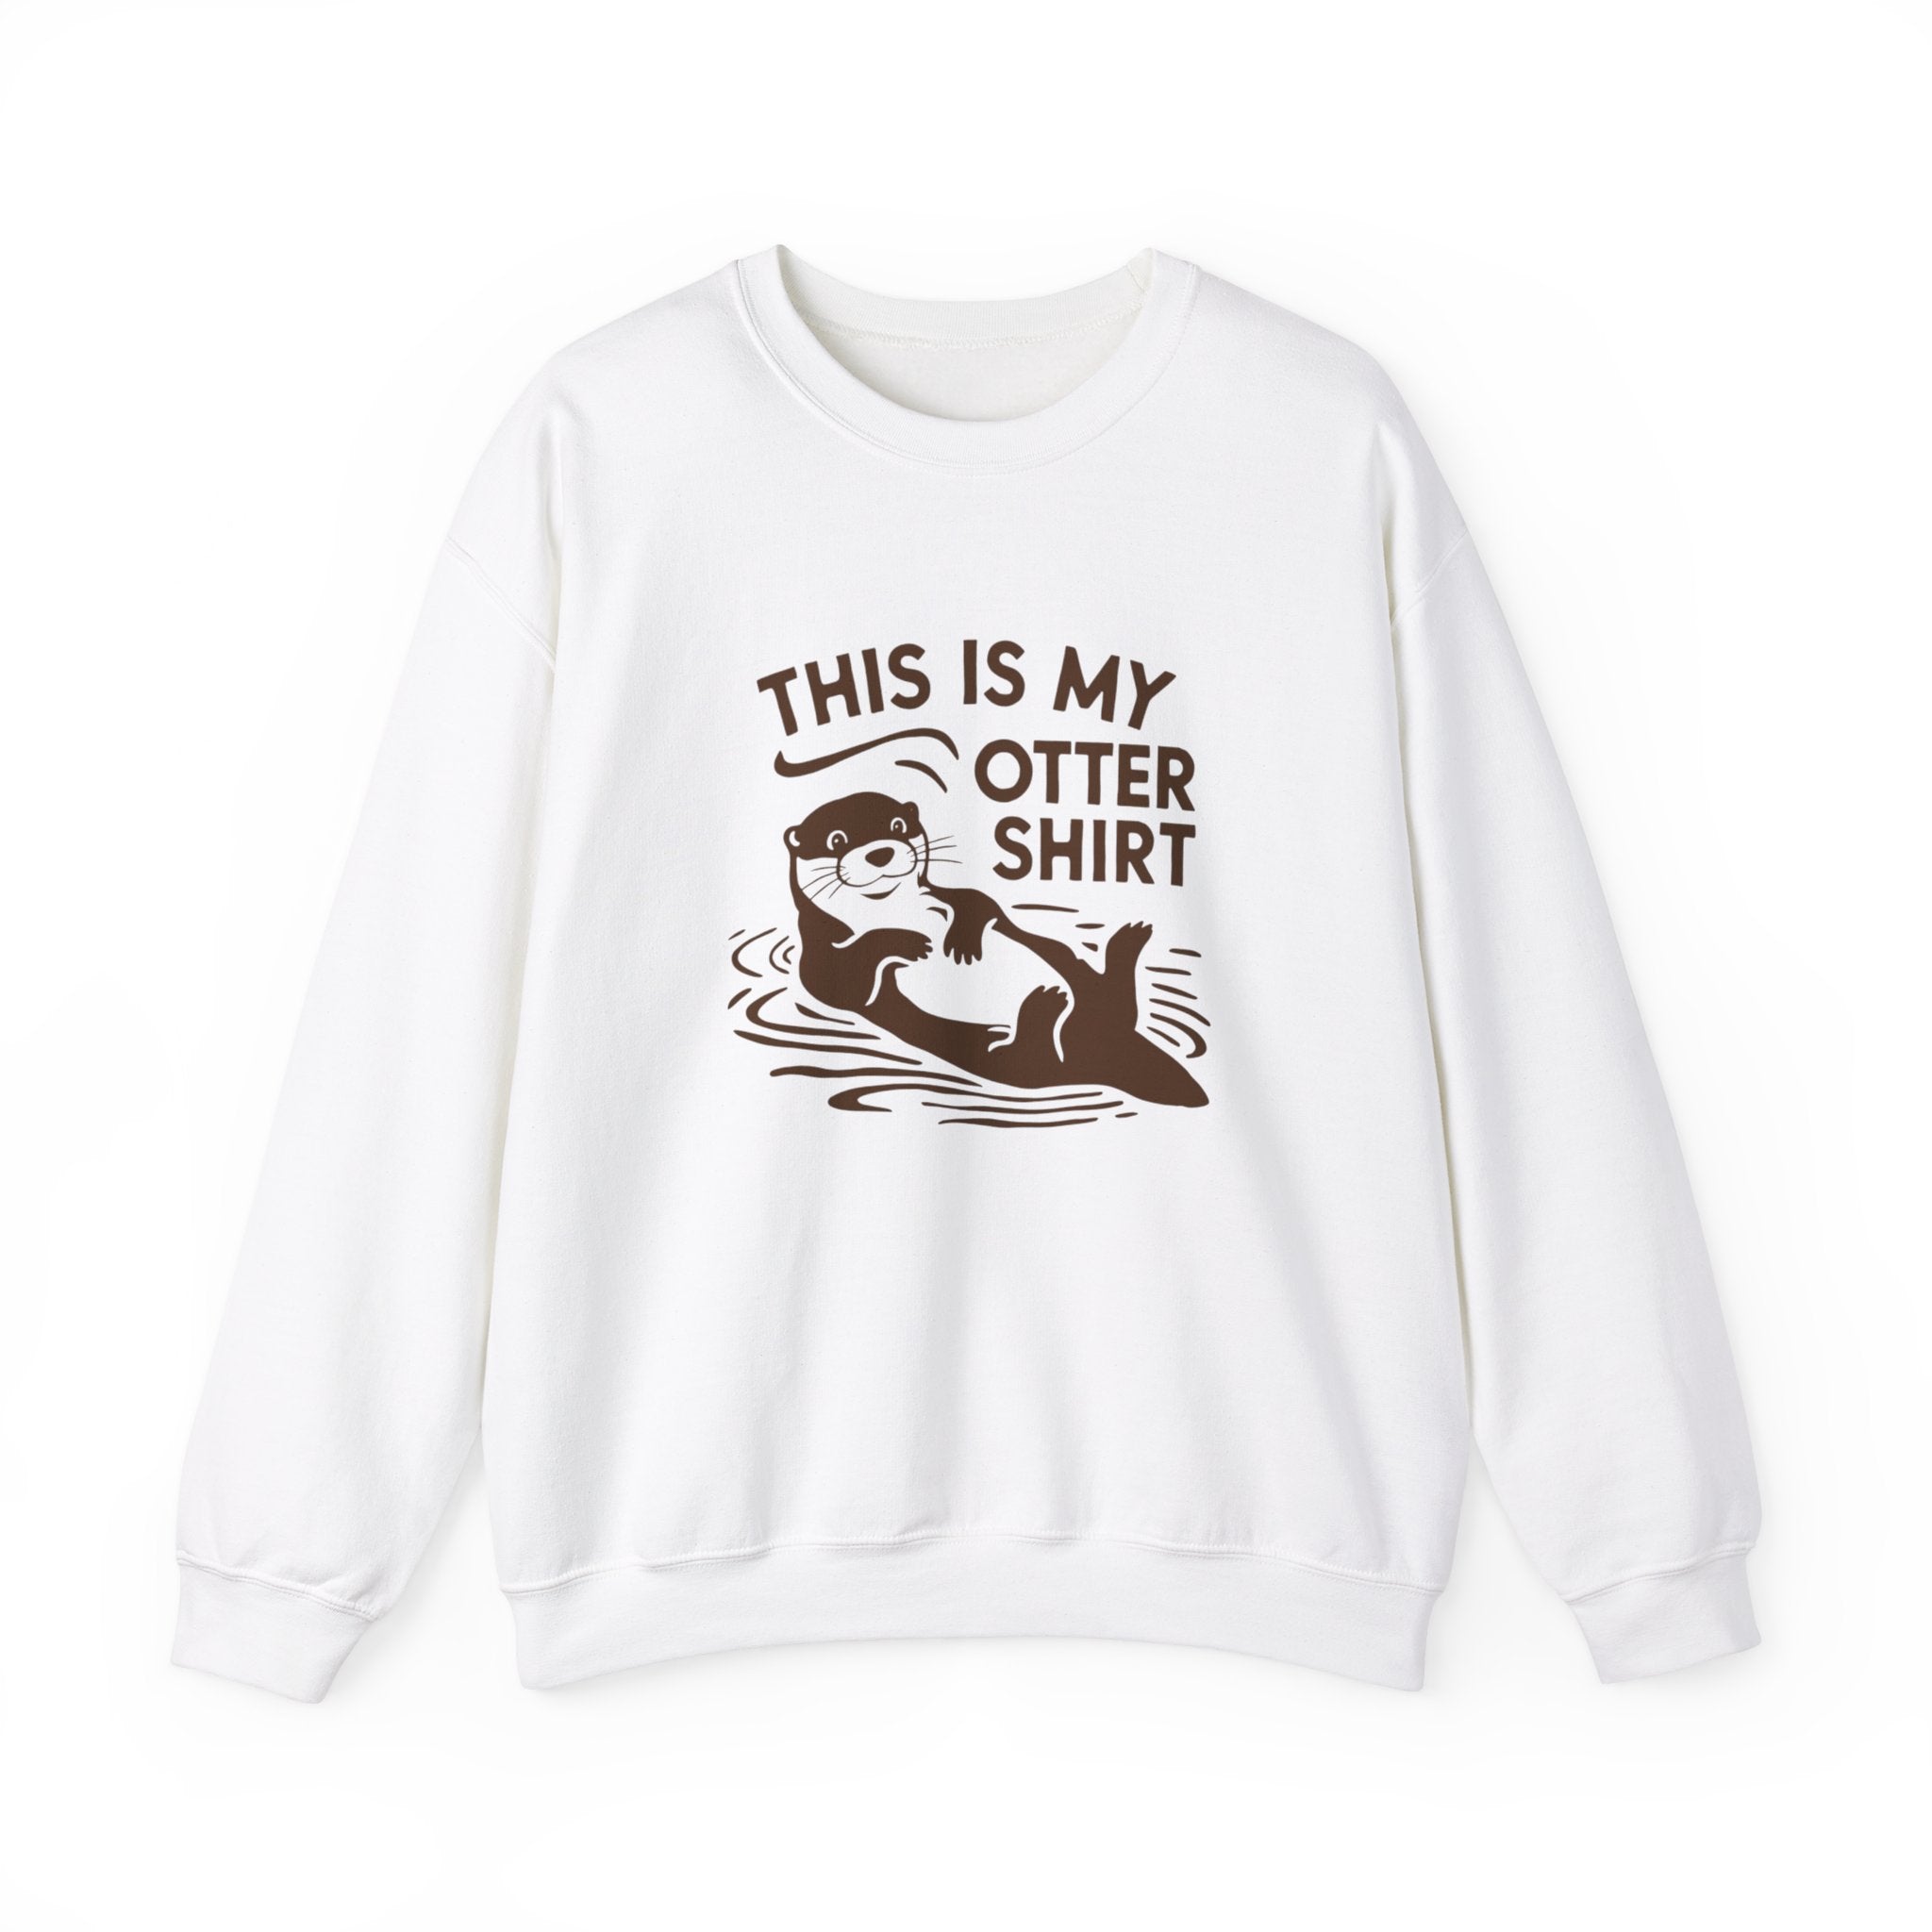 A cozy white My Otter Shirt - Sweatshirt featuring a graphic of an otter lying down and text that reads "This is my otter shirt," perfect for the chilly seasons.